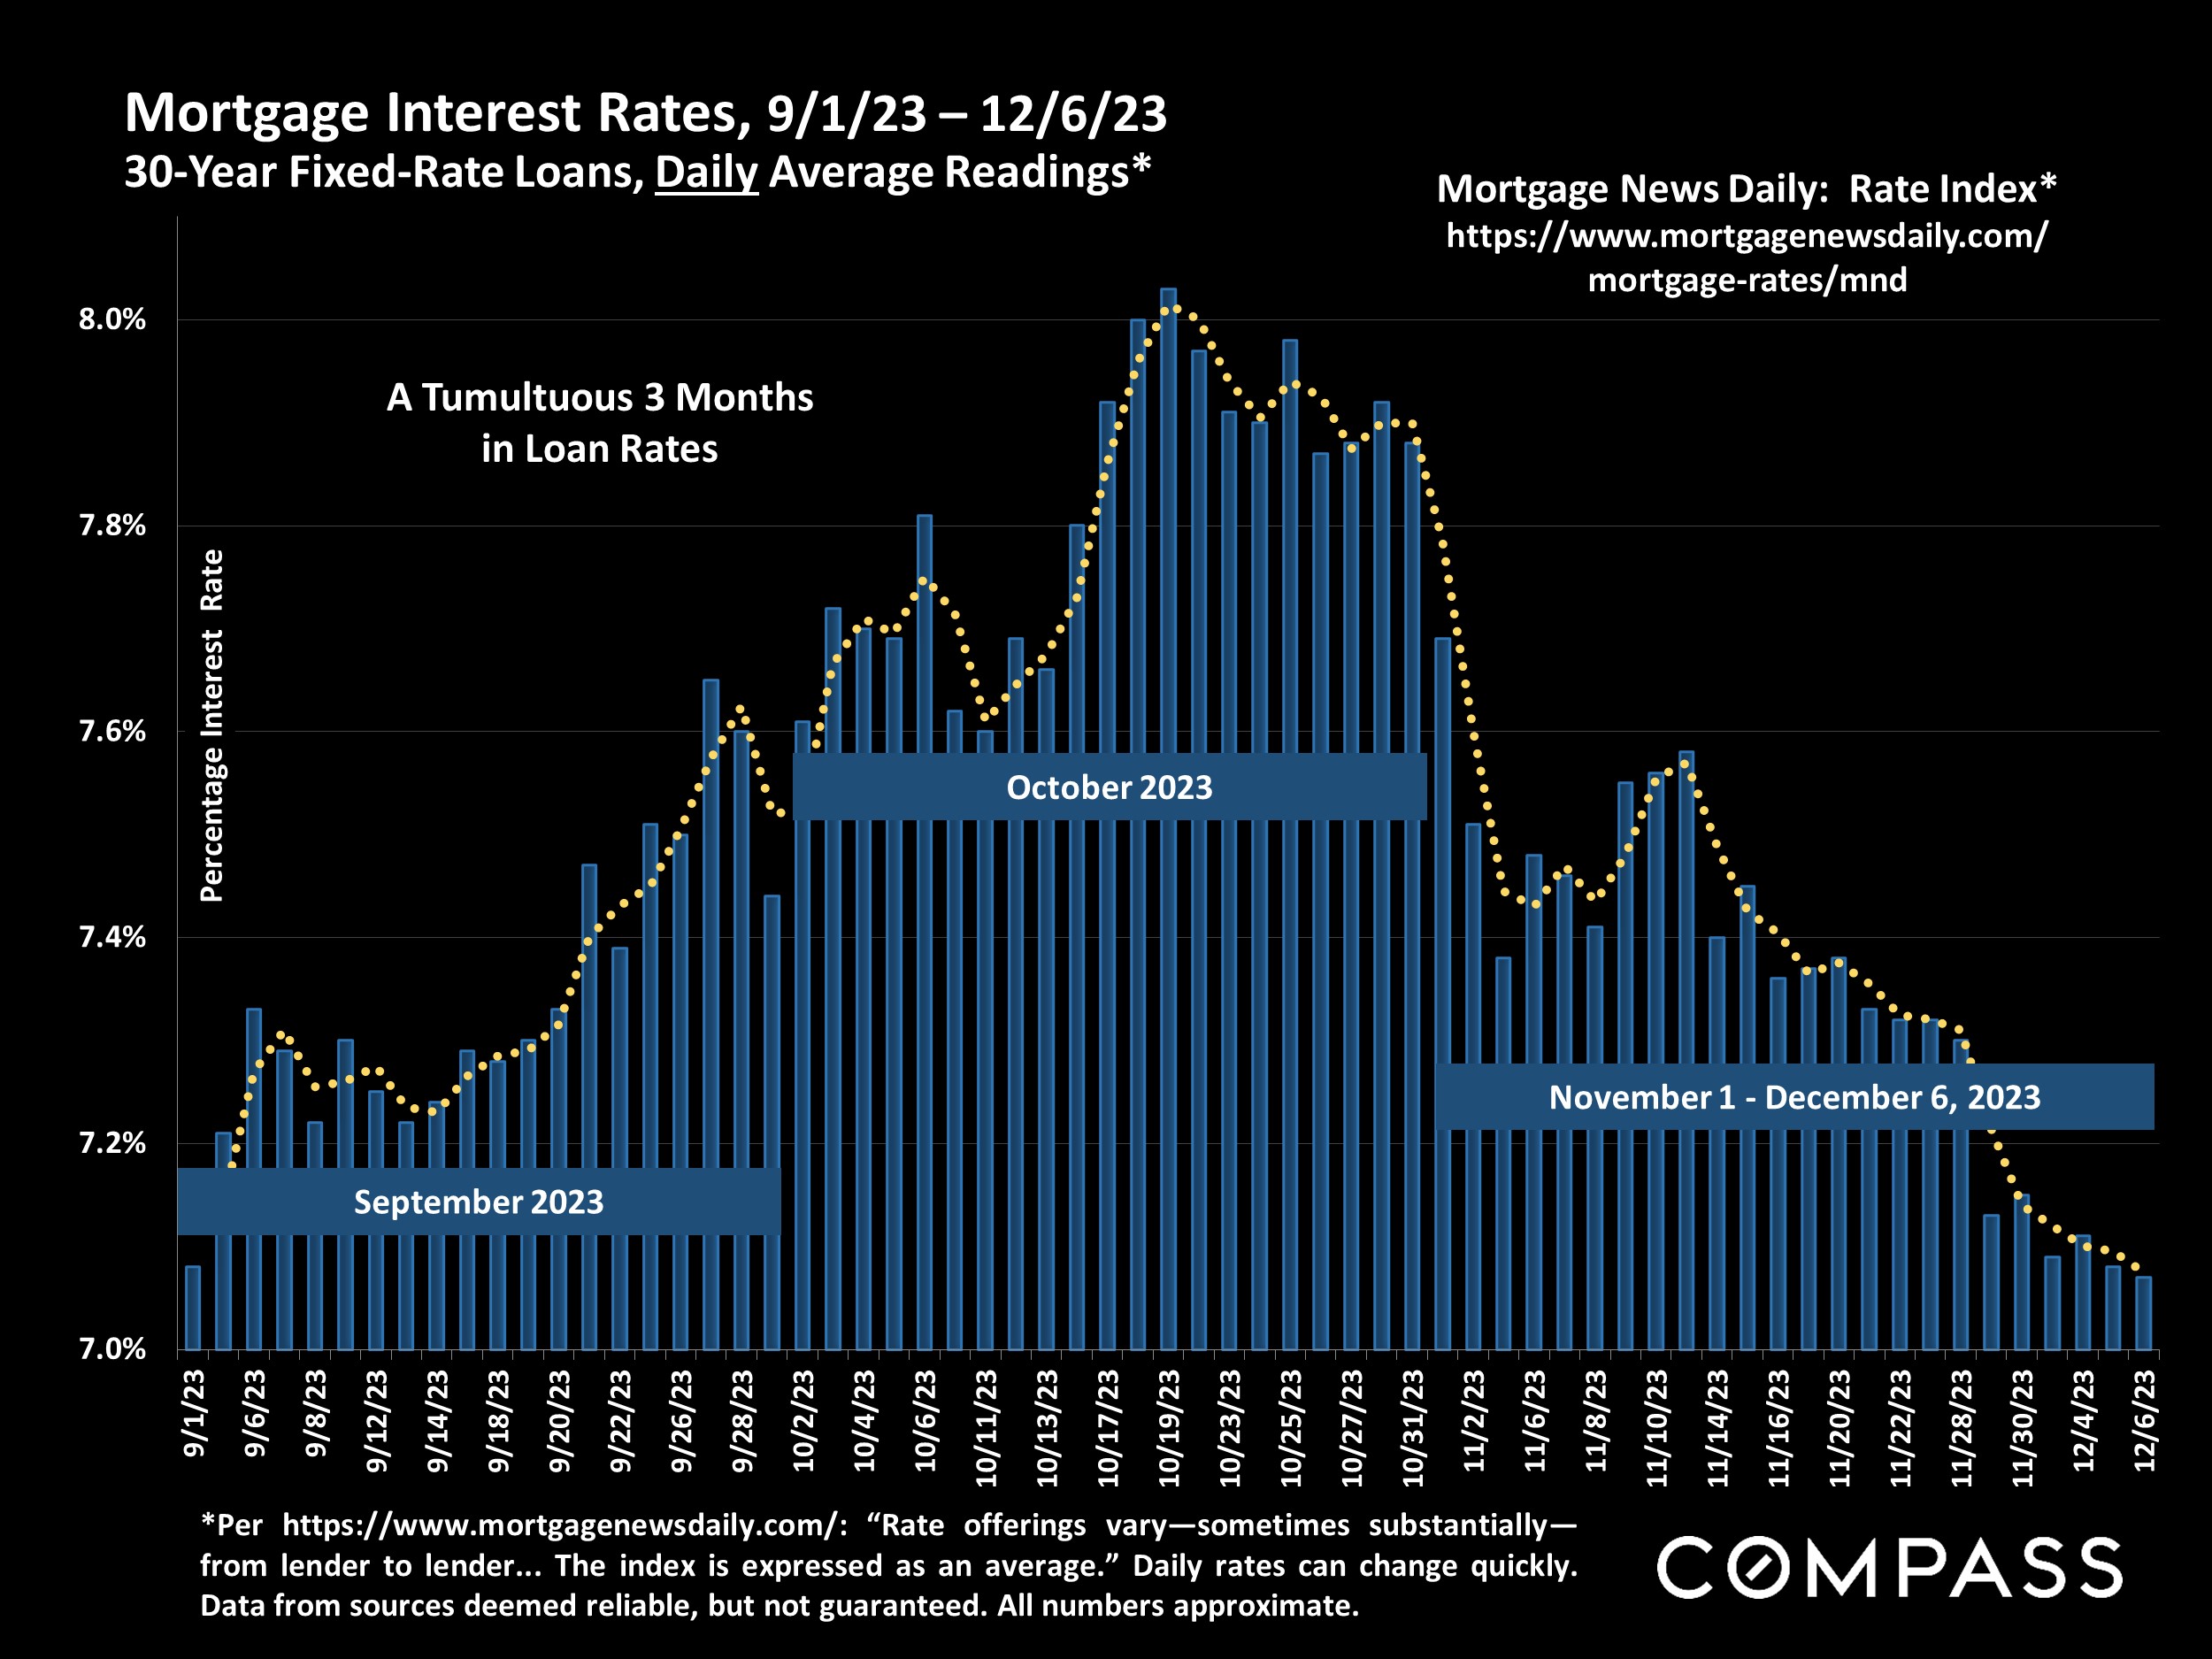 Mortgage Interest Rates, 9/1/23 - 12/6/23 30-Year Fixed-Rate Loans, Daily Average Readings*